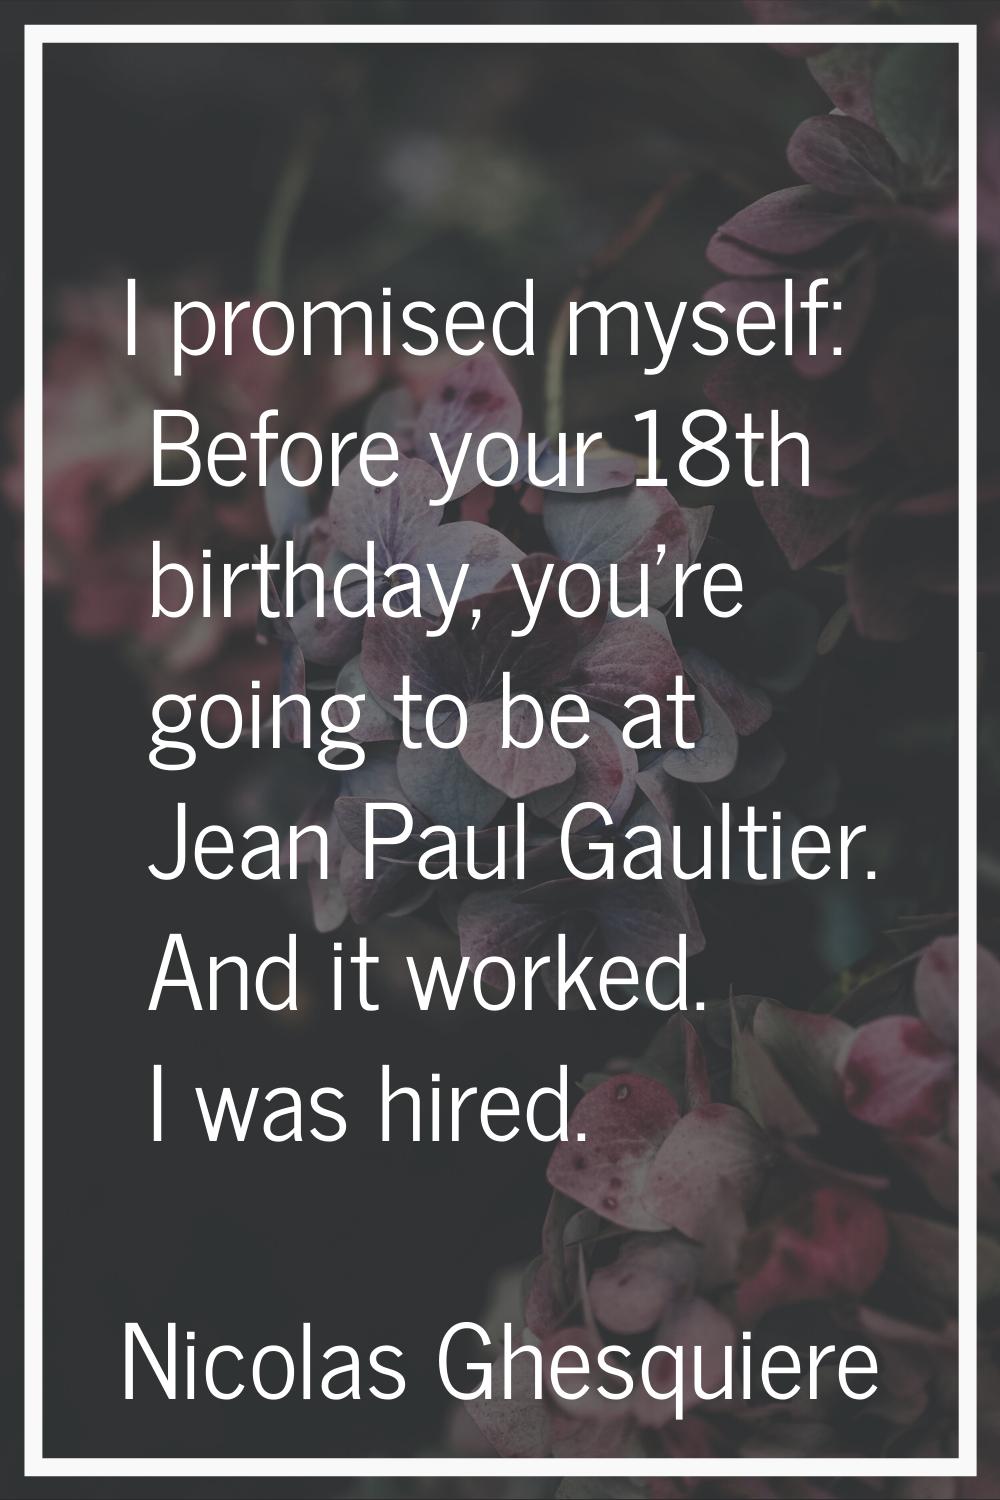 I promised myself: Before your 18th birthday, you're going to be at Jean Paul Gaultier. And it work